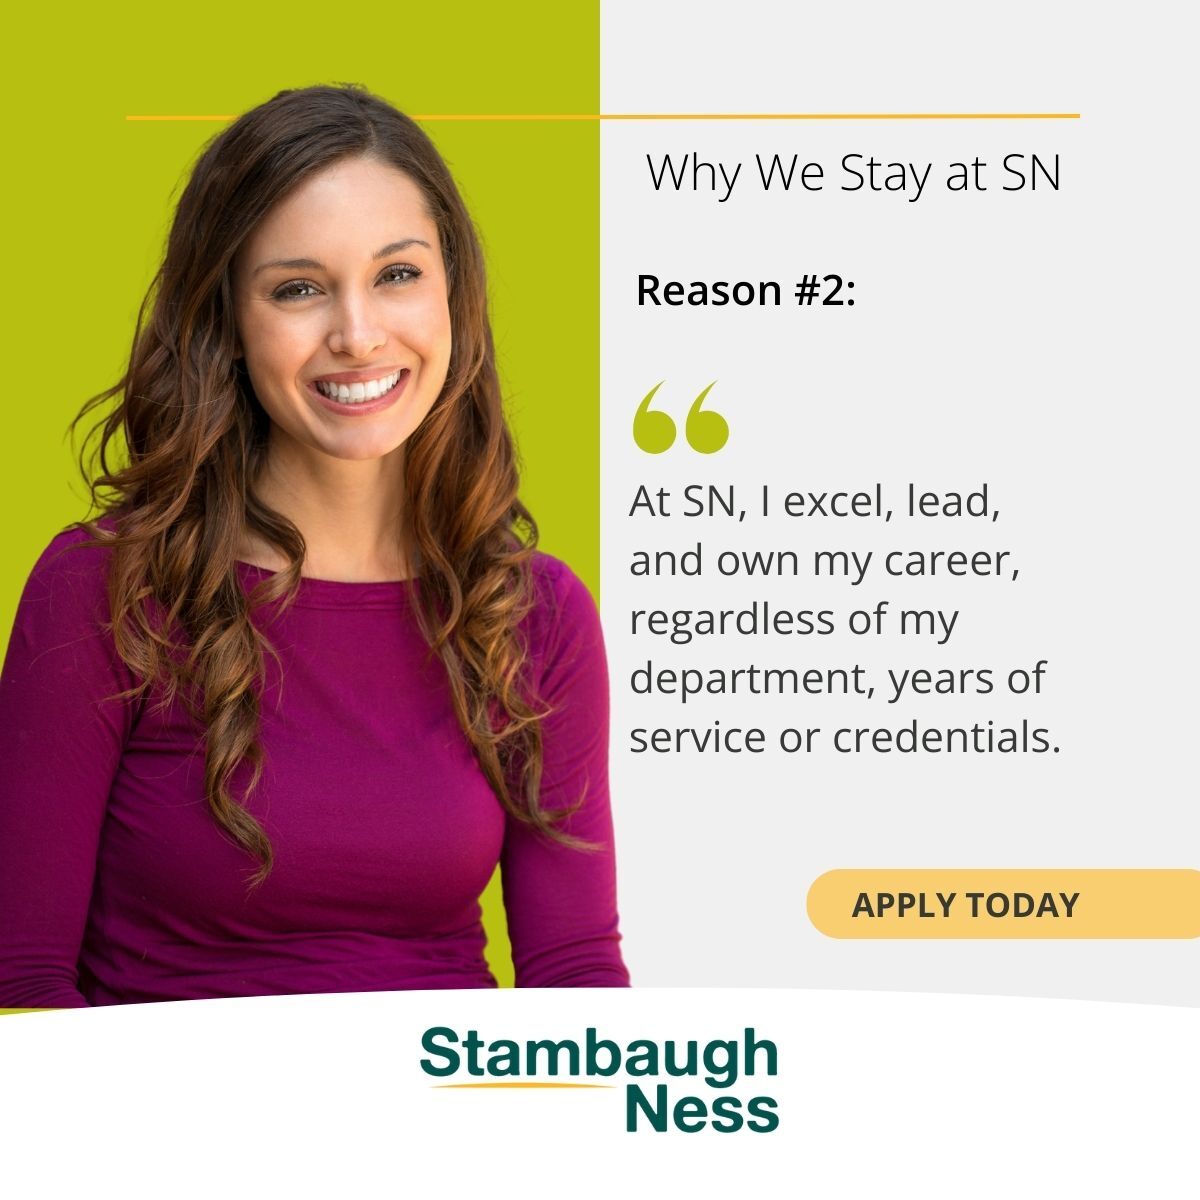 No Limitations! At SN, your skills & passion pave the way to leadership.

See how a non-CPA found their leadership path and thrived.

Apply now & launch your career! bit.ly/43VdP8l

#StambaughNess #Accountingjobs #careergrowth #remotework  #flexiblejobs #leadership